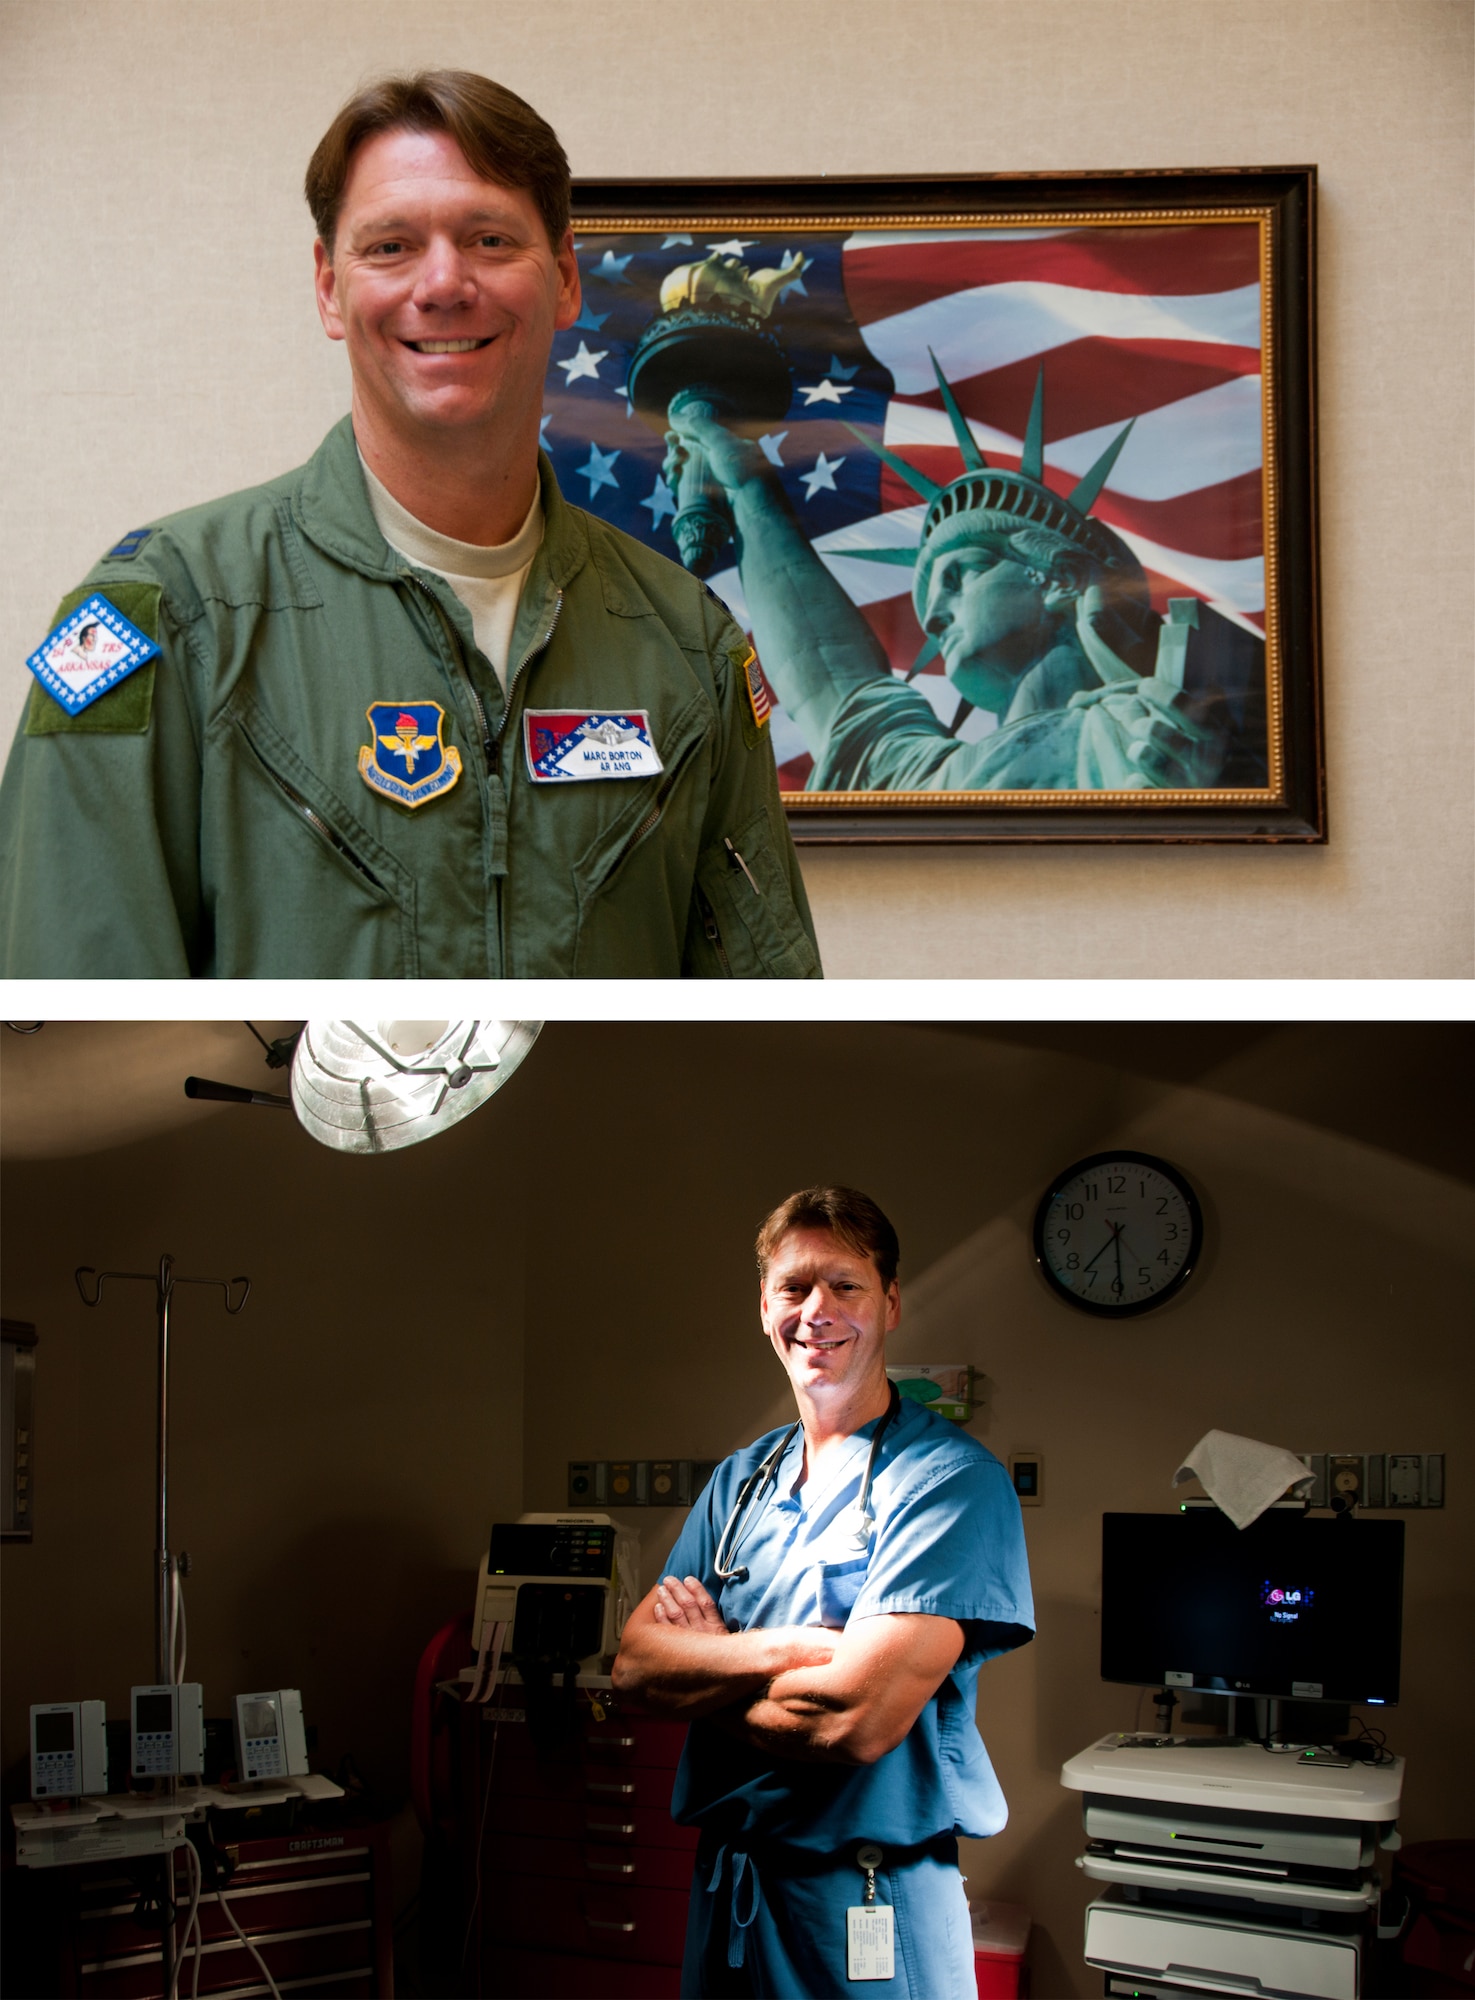 Capt. Marc Borton at drill (top) and at his civilivian job in Jacksonville as an ER surgeon.